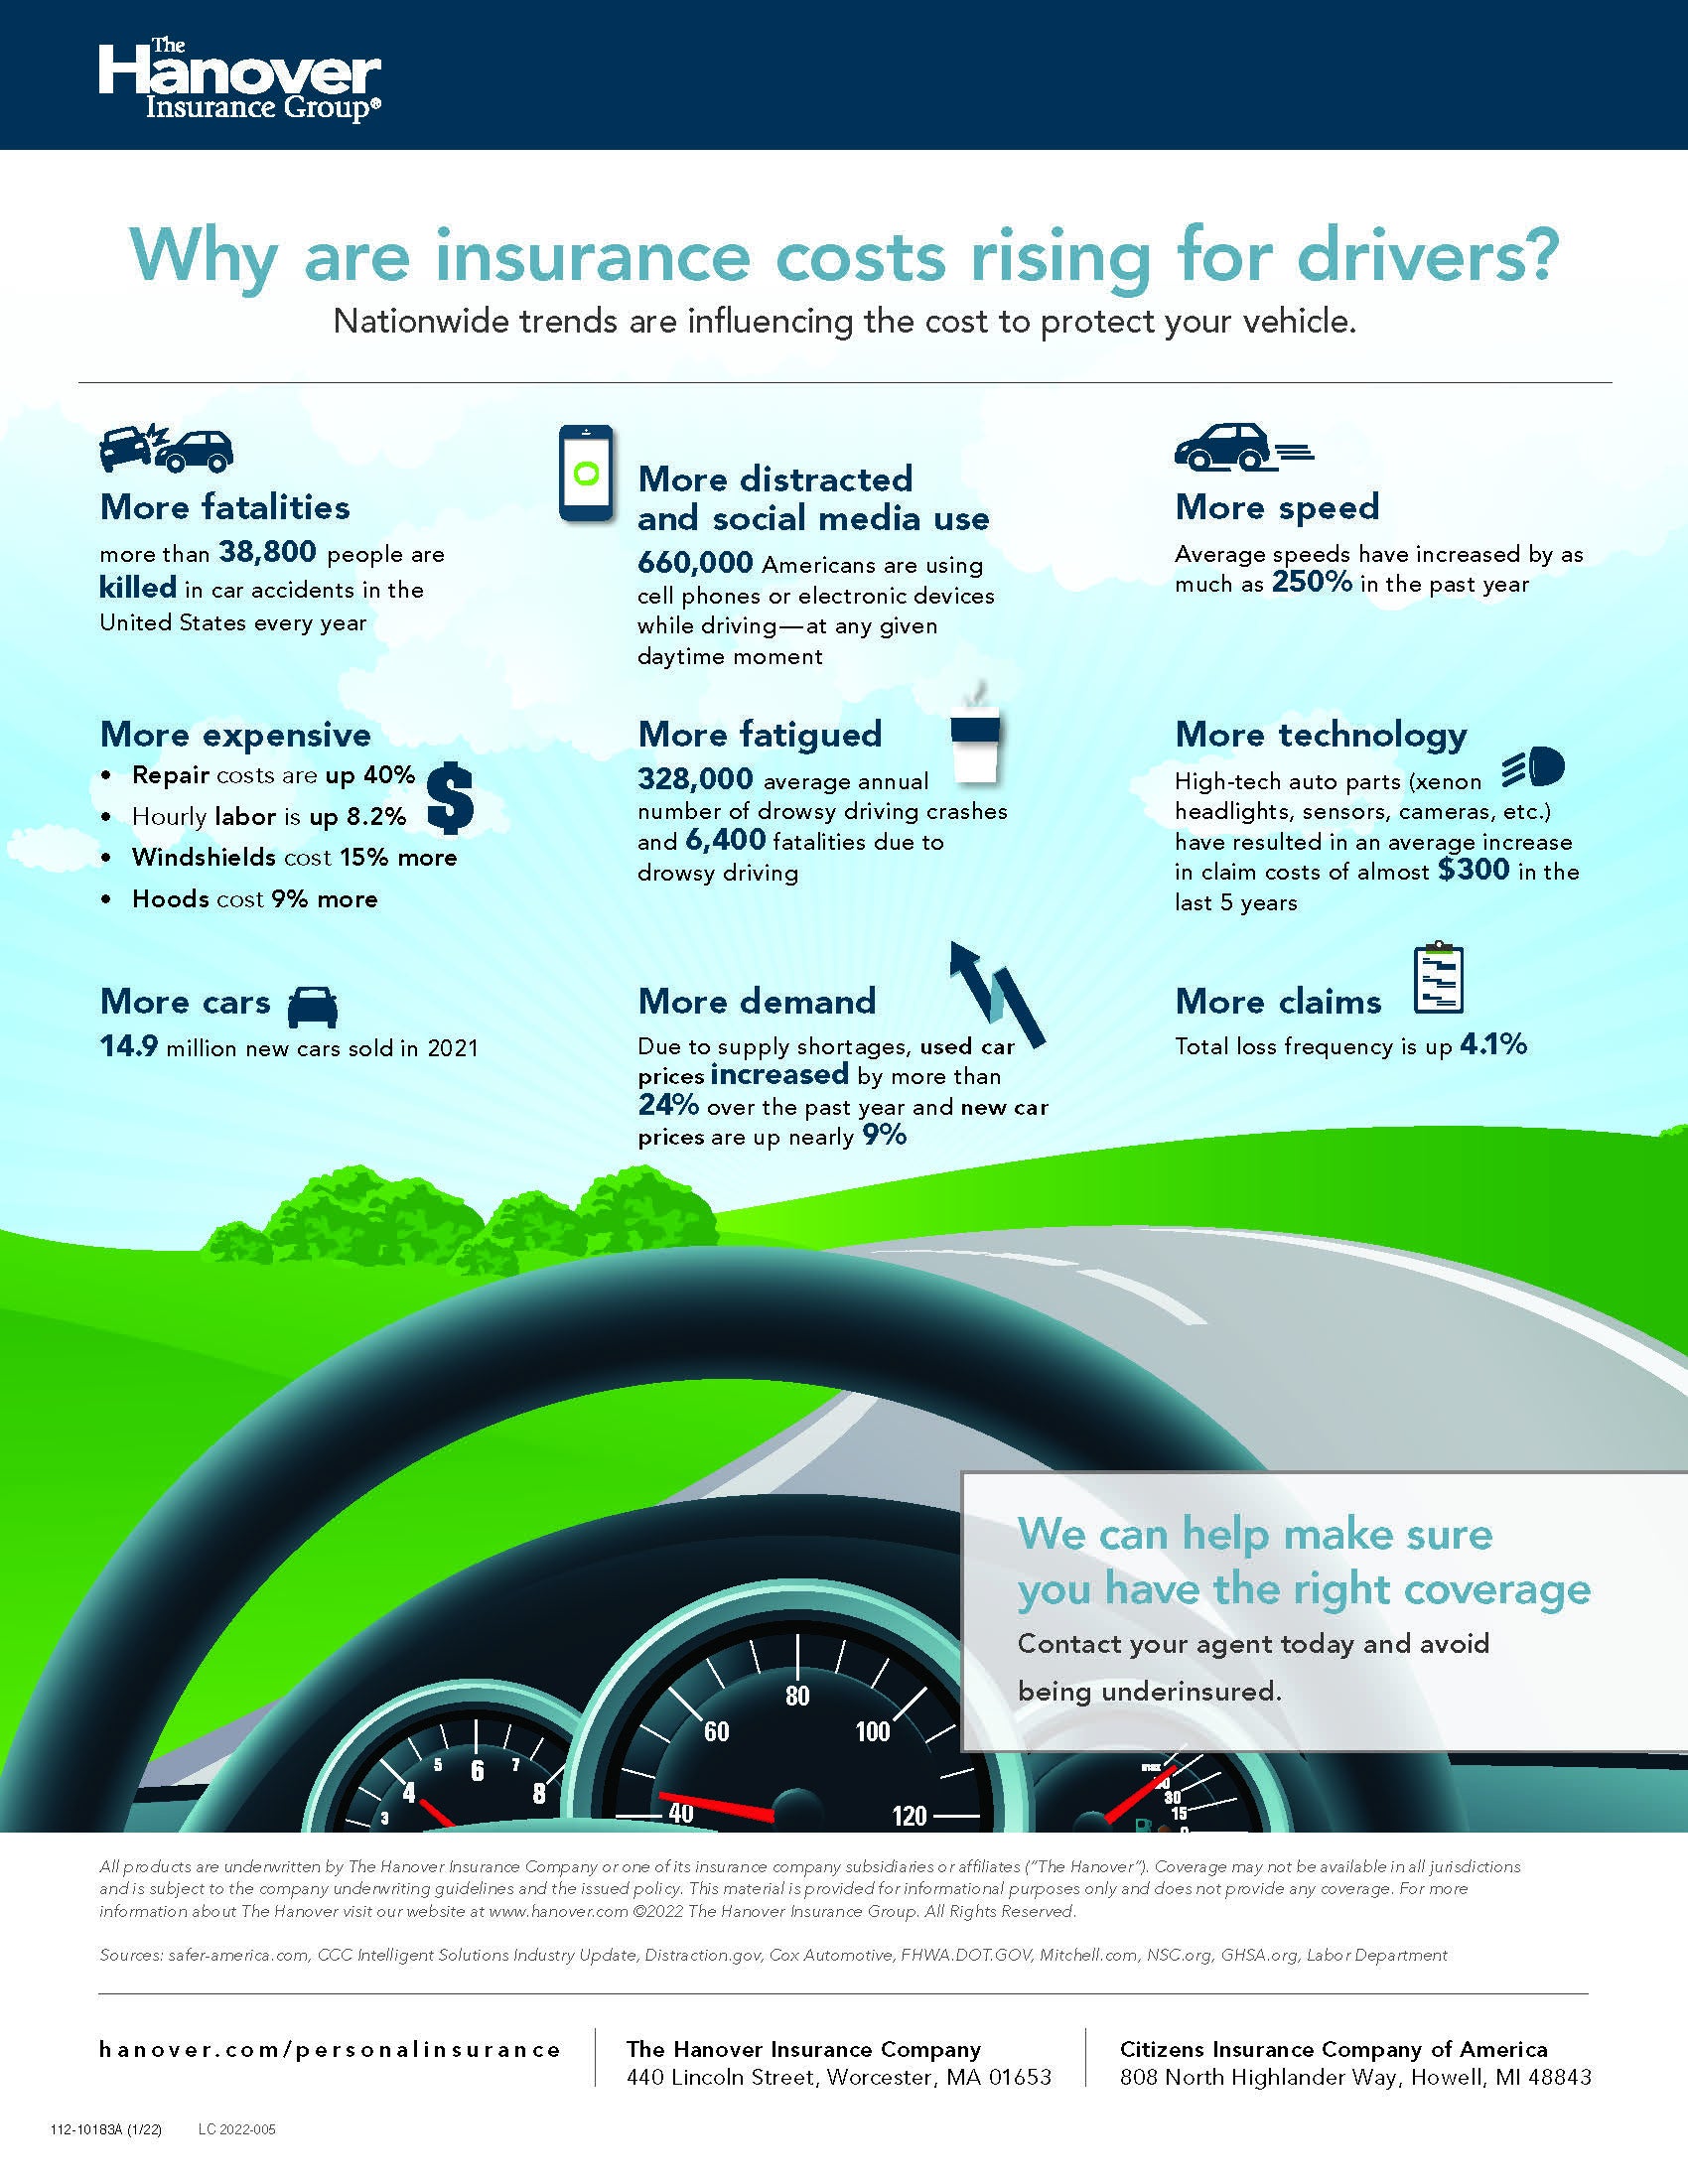 Why are insurance costs rising for drivers?